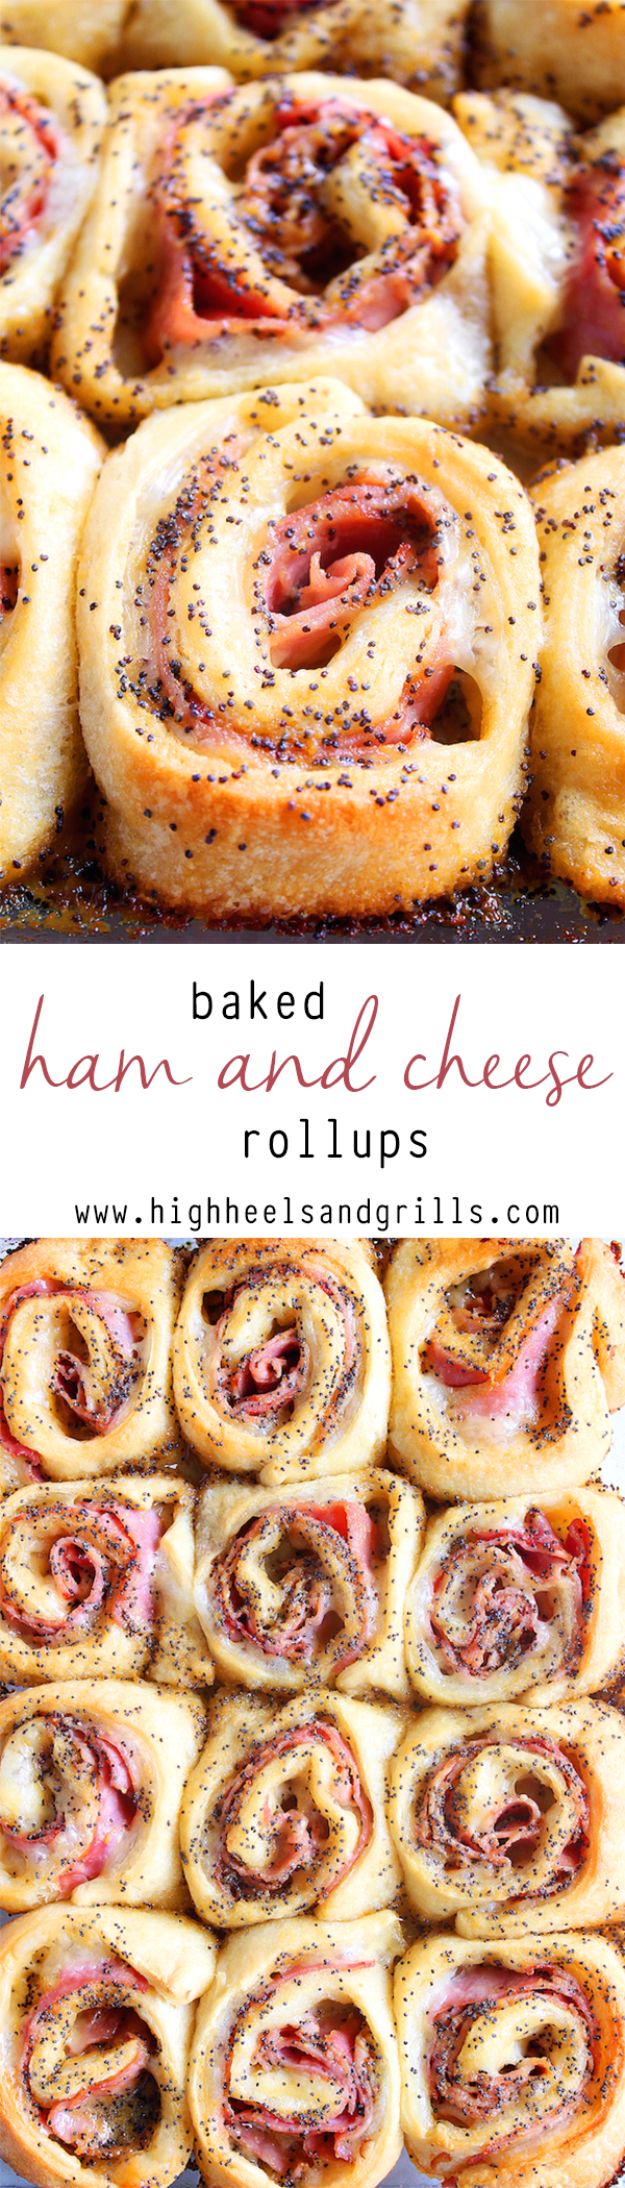 Best Brunch Recipes - Baked Ham and Cheese Rollups - Eggs, Pancakes, Waffles, Casseroles, Vegetable Dishes and Side, Potato Recipe Ideas for Brunches - Serve A Crowd and Family with the versions of Eggs Benedict, Mimosas, Muffins and Pastries, Desserts - Make Ahead , Slow Cooler and Healthy Casserole Recipes #brunch #breakfast #recipes